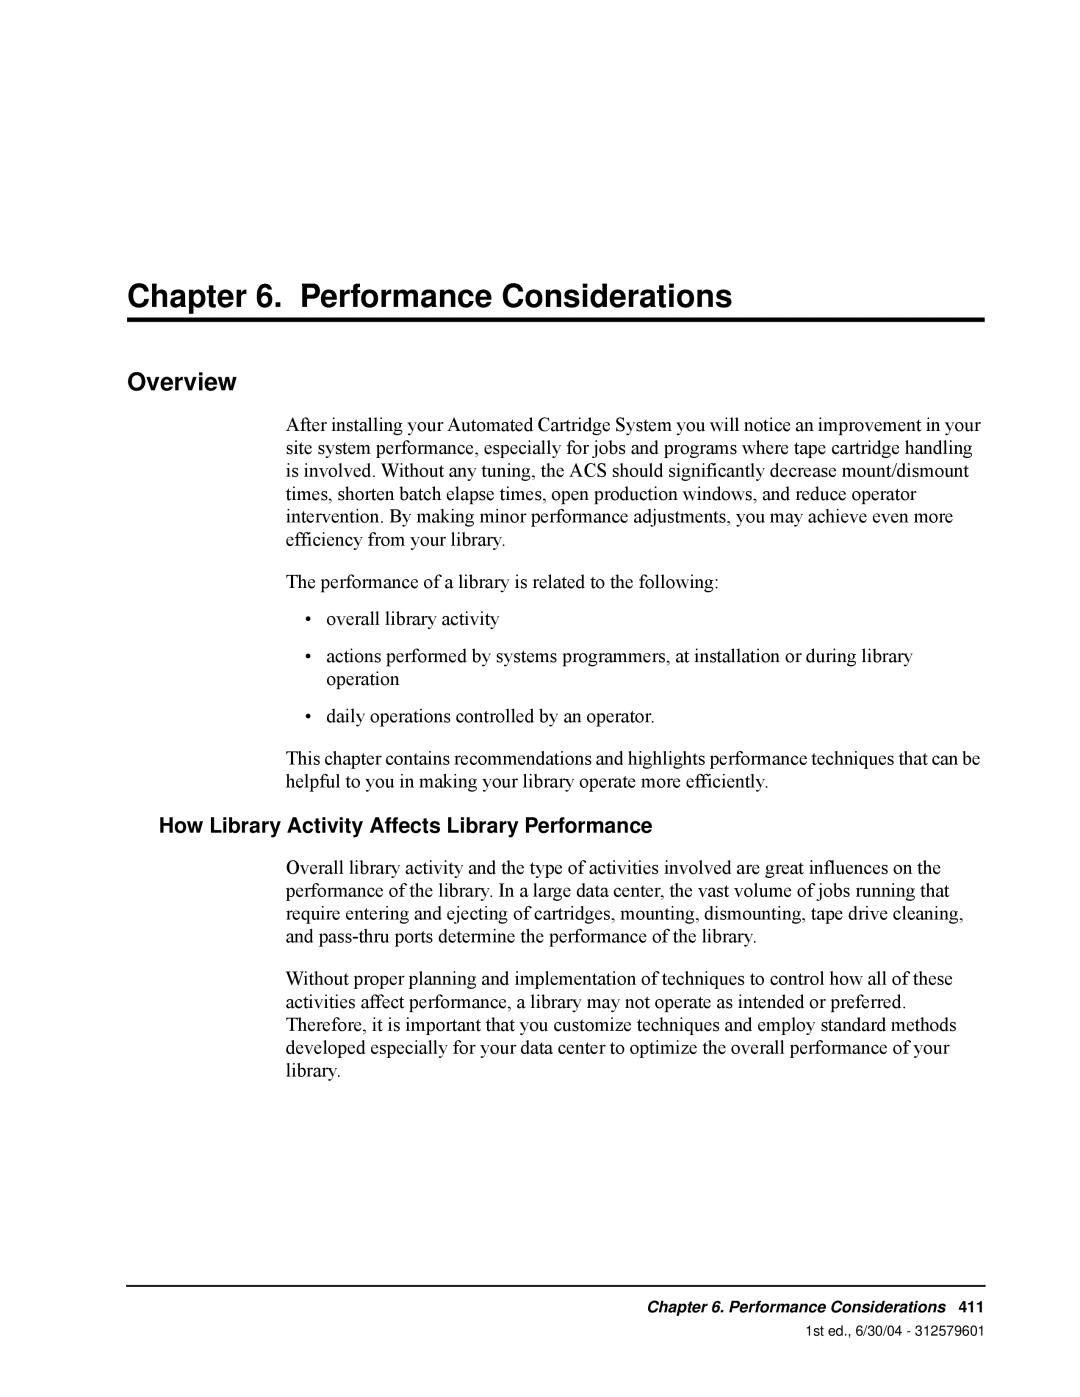 StorageTek 6 manual Performance Considerations, How Library Activity Affects Library Performance, Overview 